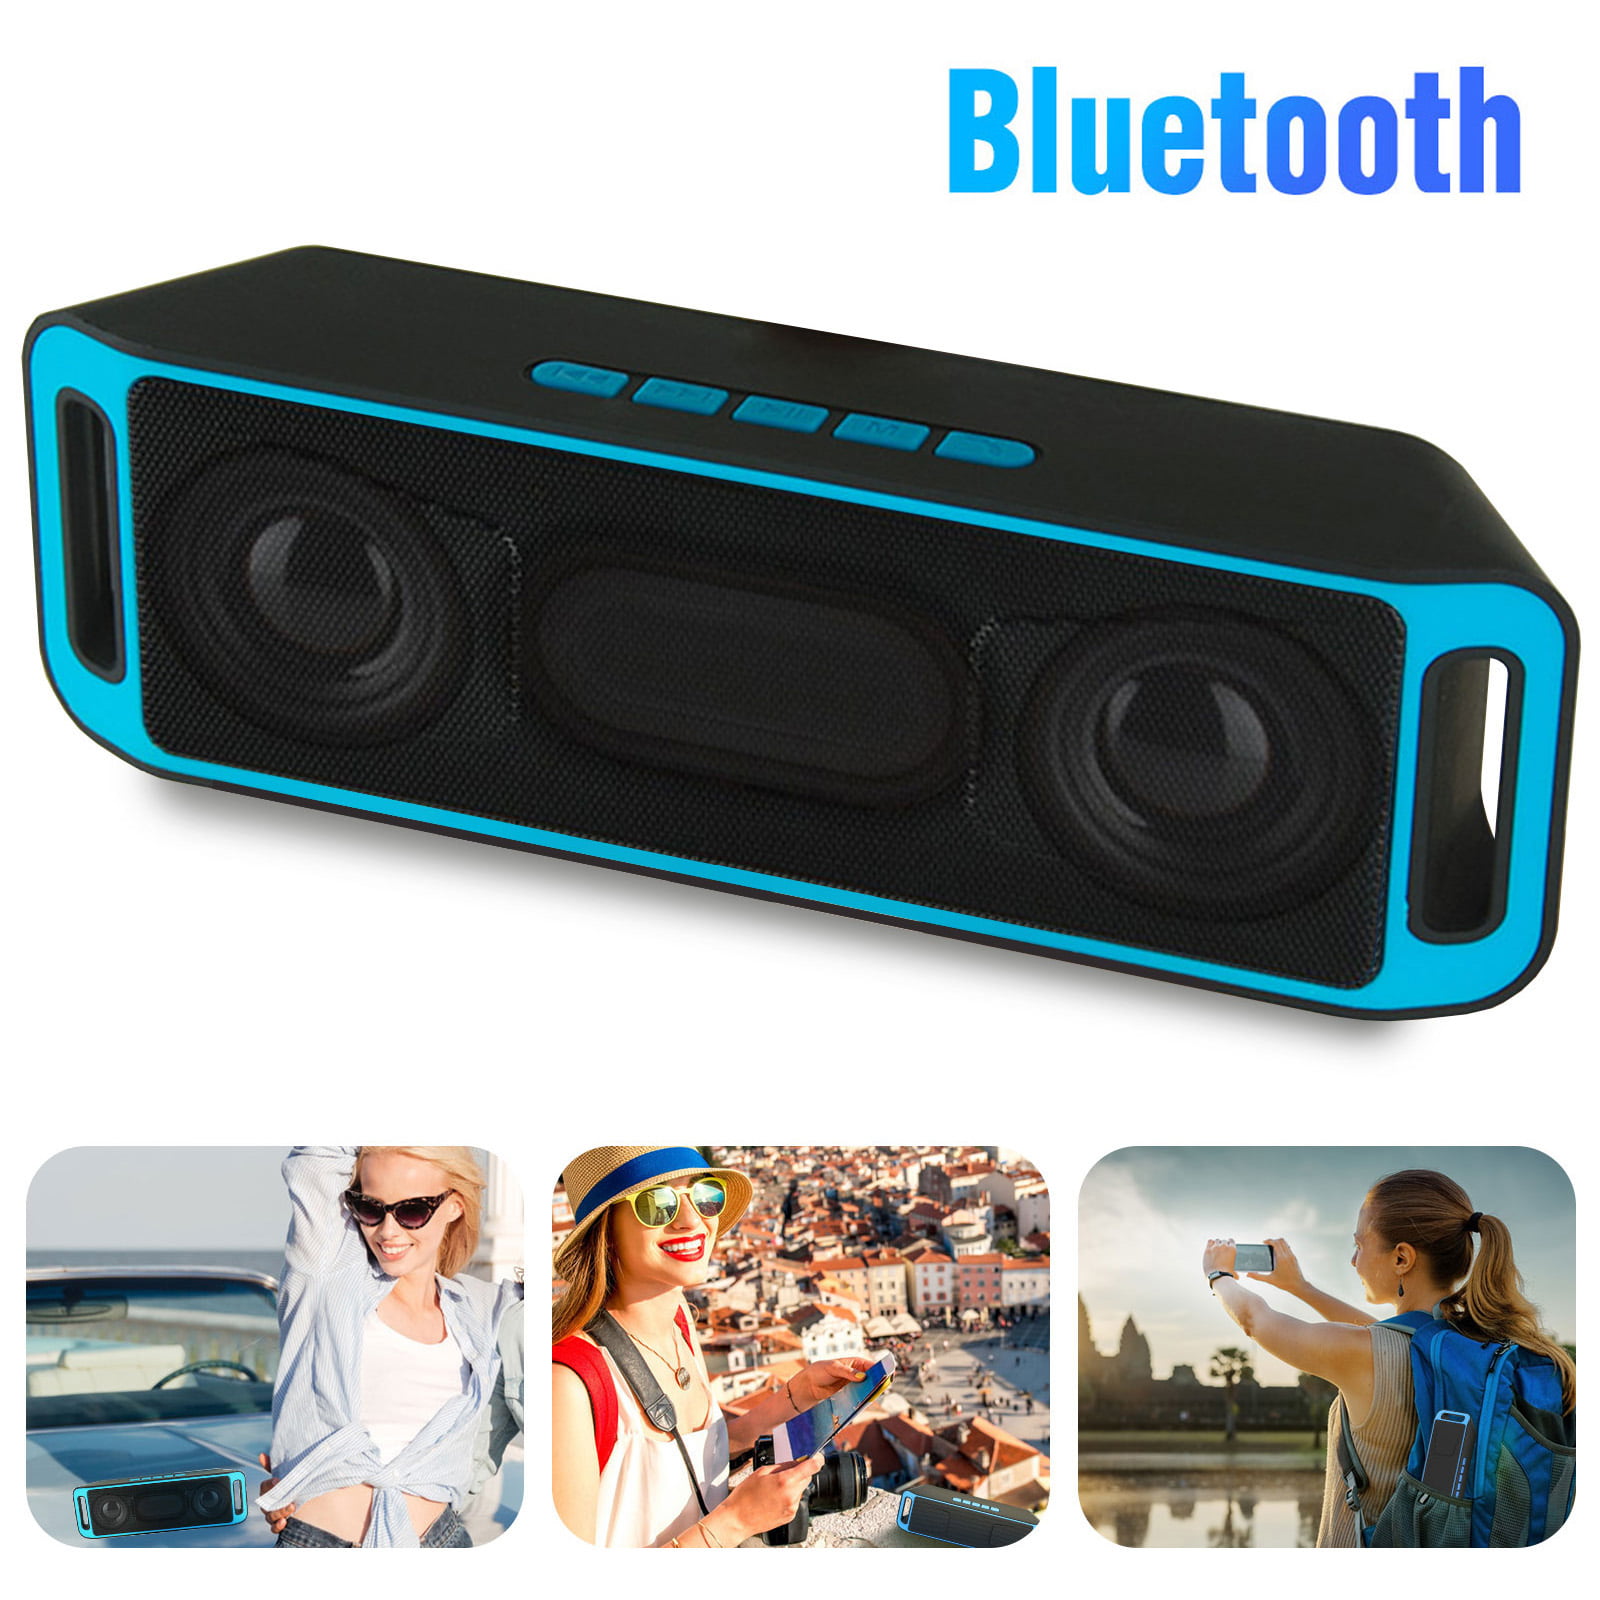 UWater Wireless Bluetooth Action Portable Speaker 100% Waterproof for Outdoors 